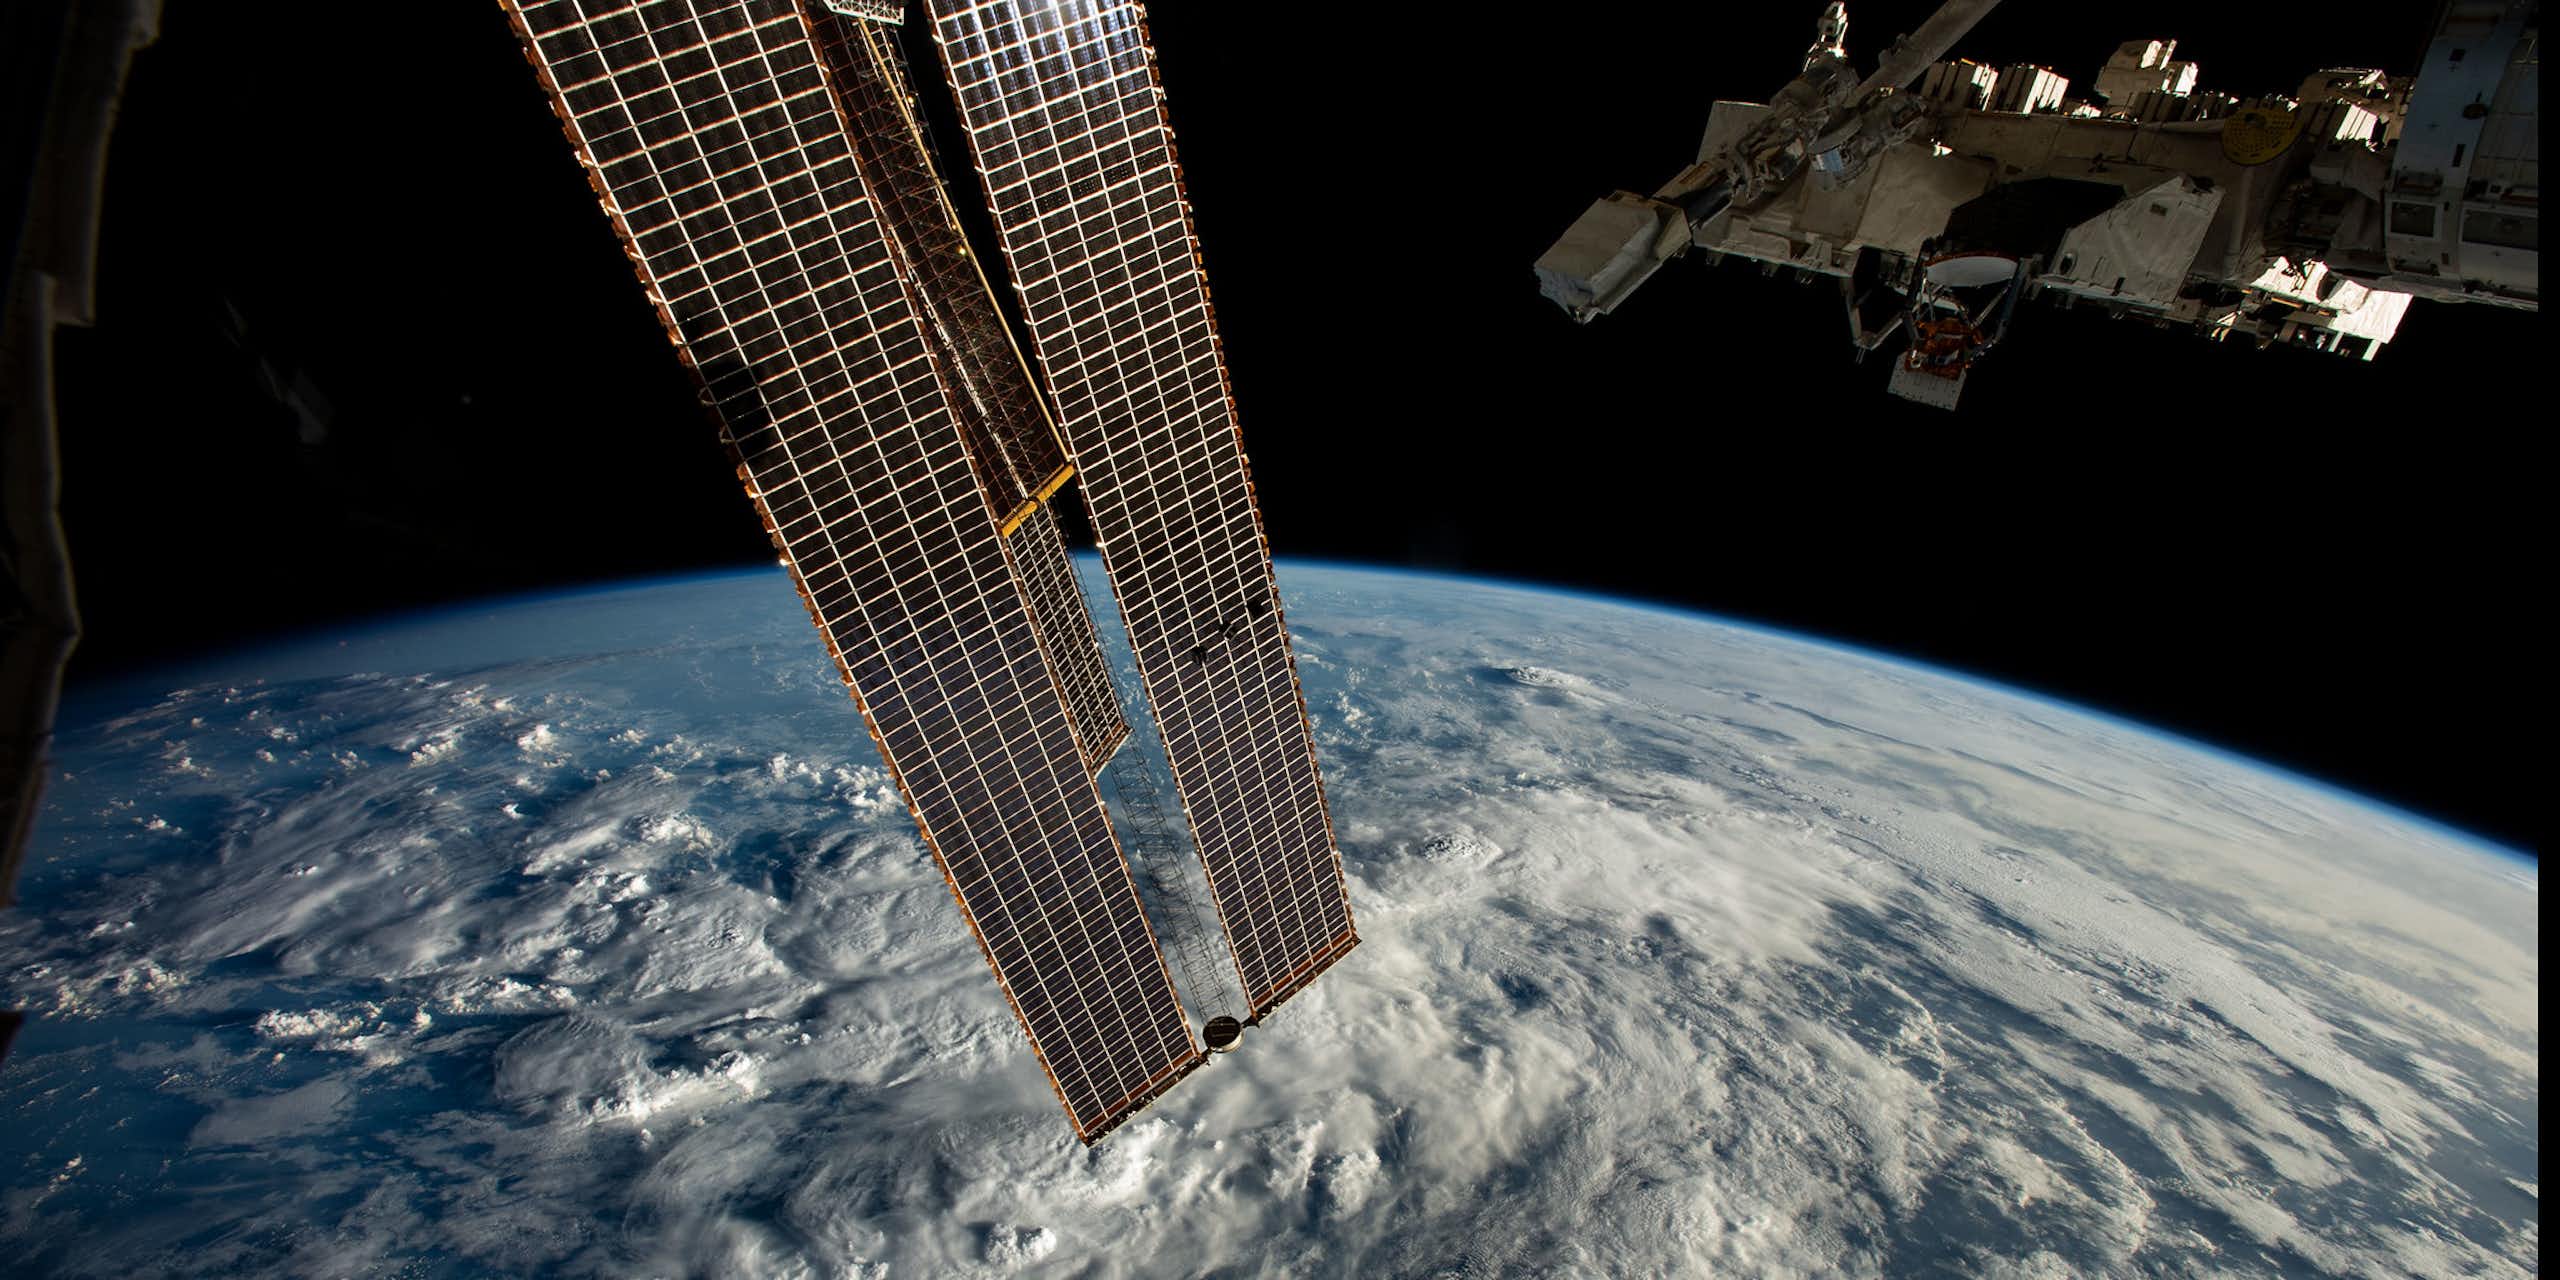 long thin rectangular structure in orbit above clouds on Earth